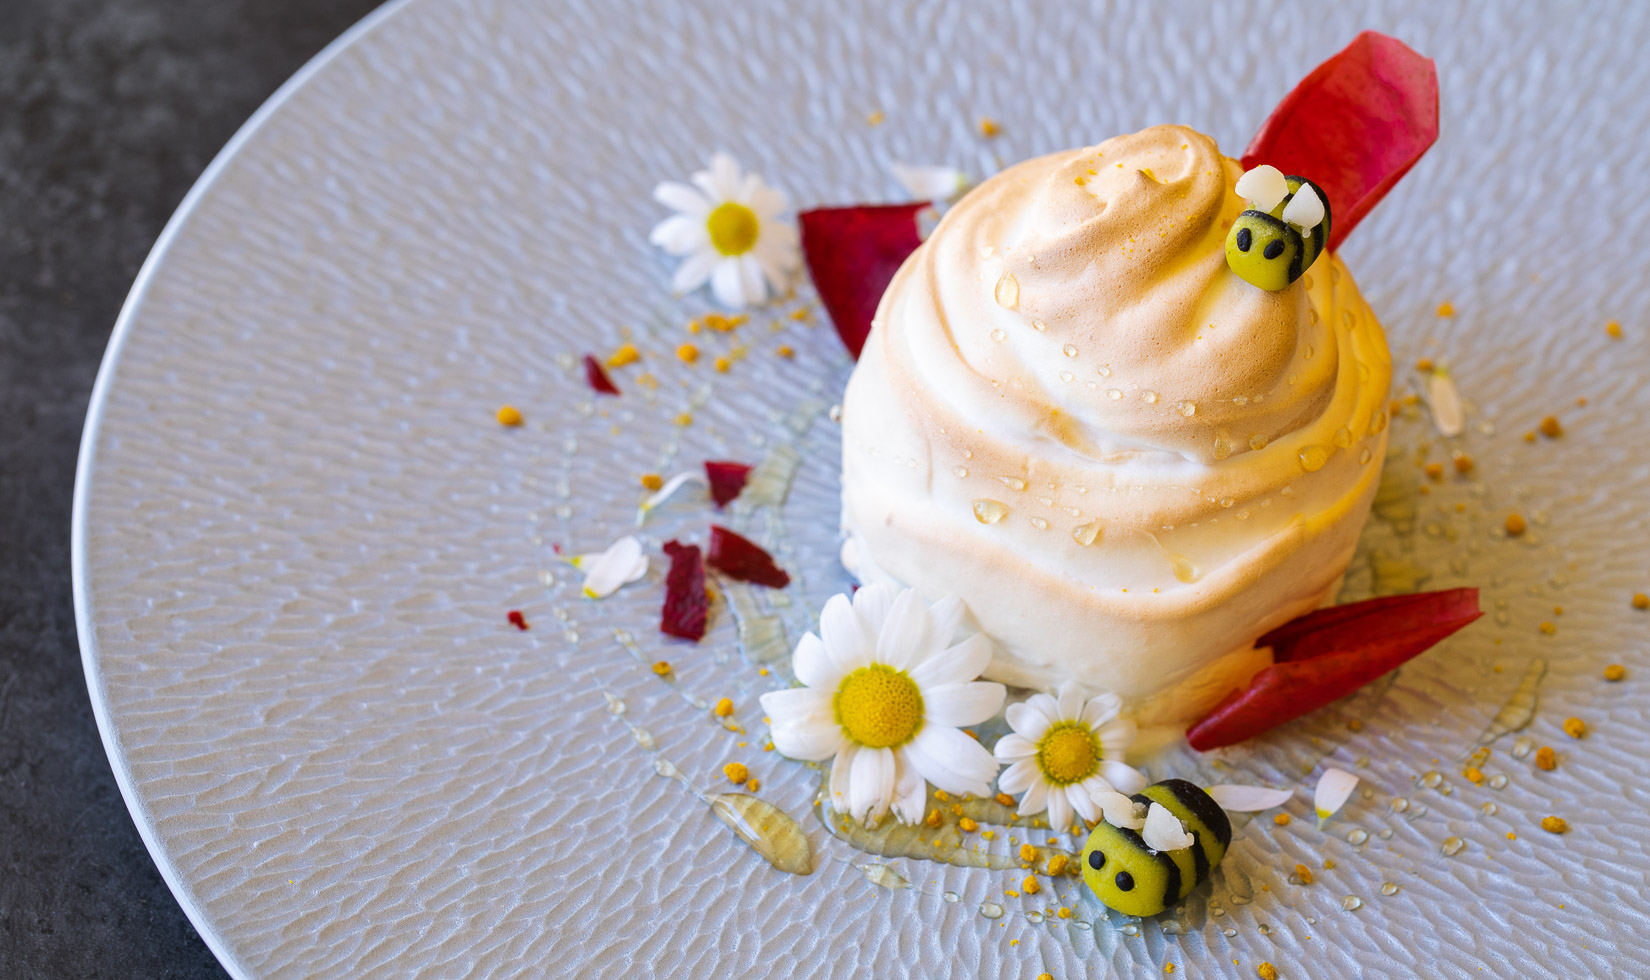 Baked Alaska dessert with marizpan bees and edible flowers on blue plate